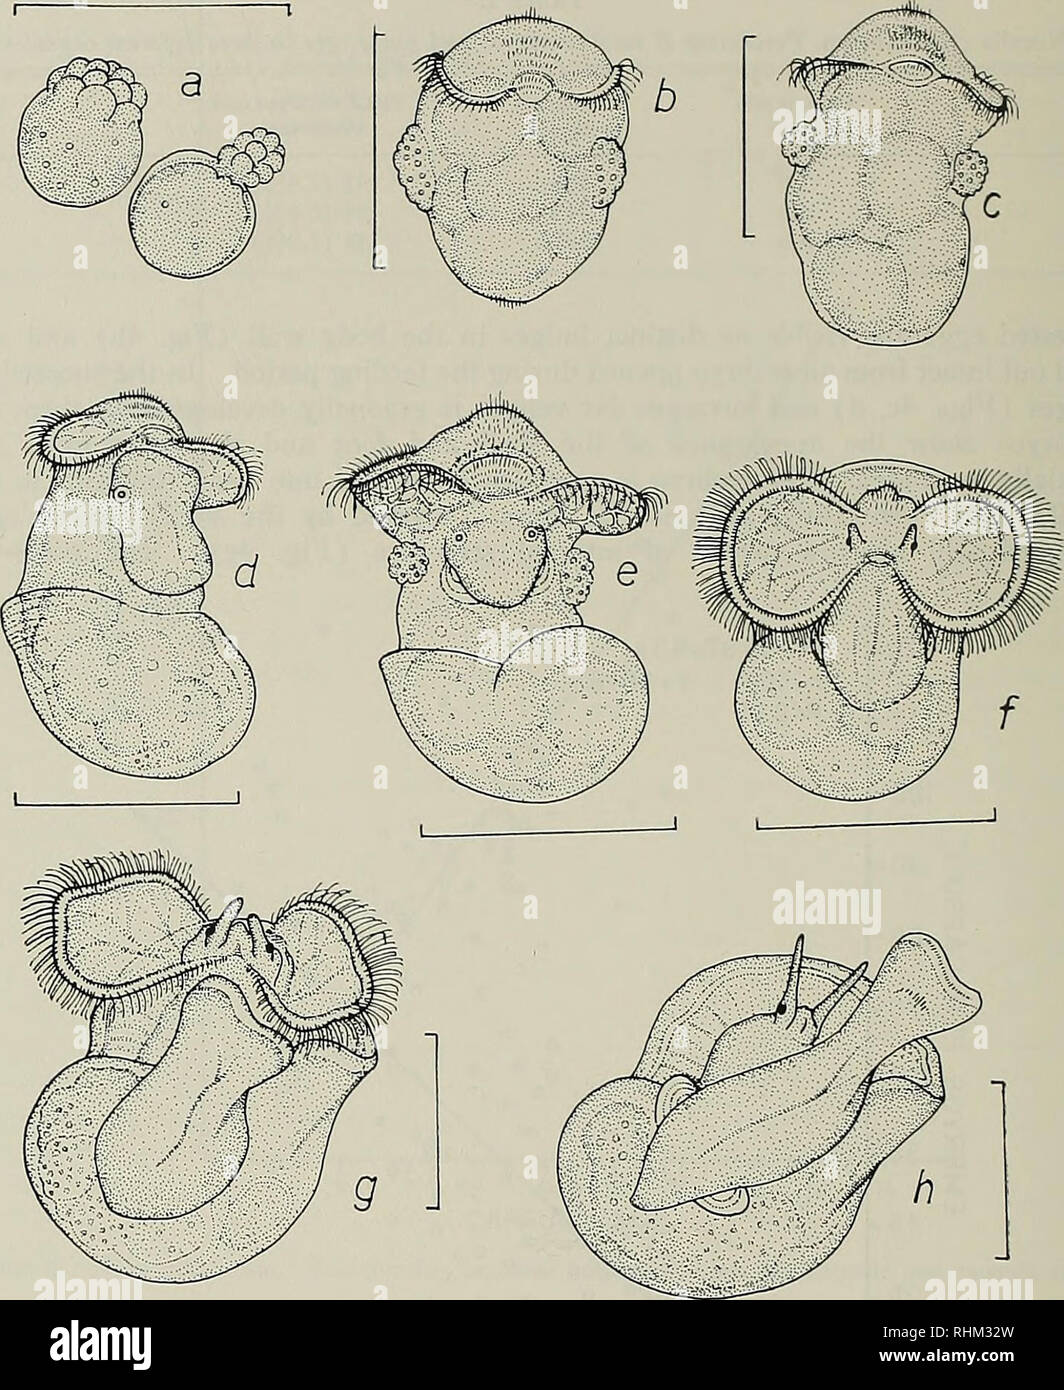 . The Biological bulletin. Biology; Zoology; Marine biology. 458 C. S. GALLARDO. Figure 4. N. crassilabrum. Different stages of intracapsular development, a) a fertile egg (left side) next to a nurse-egg, in cleavage stage, b) trochophore stage with the outlines of whole nurse-eggs seen through the body wall, c-d) early veliger stage, e-f) mean and advanced veliger stage, g) pre-hatching stage with the velum in reabsorption process, h) hatching juvenile stage. The lines equal 500 )im. face of the foot gradually differentiates a small, thin operculum. On either side of the foot a spherical stat Stock Photo